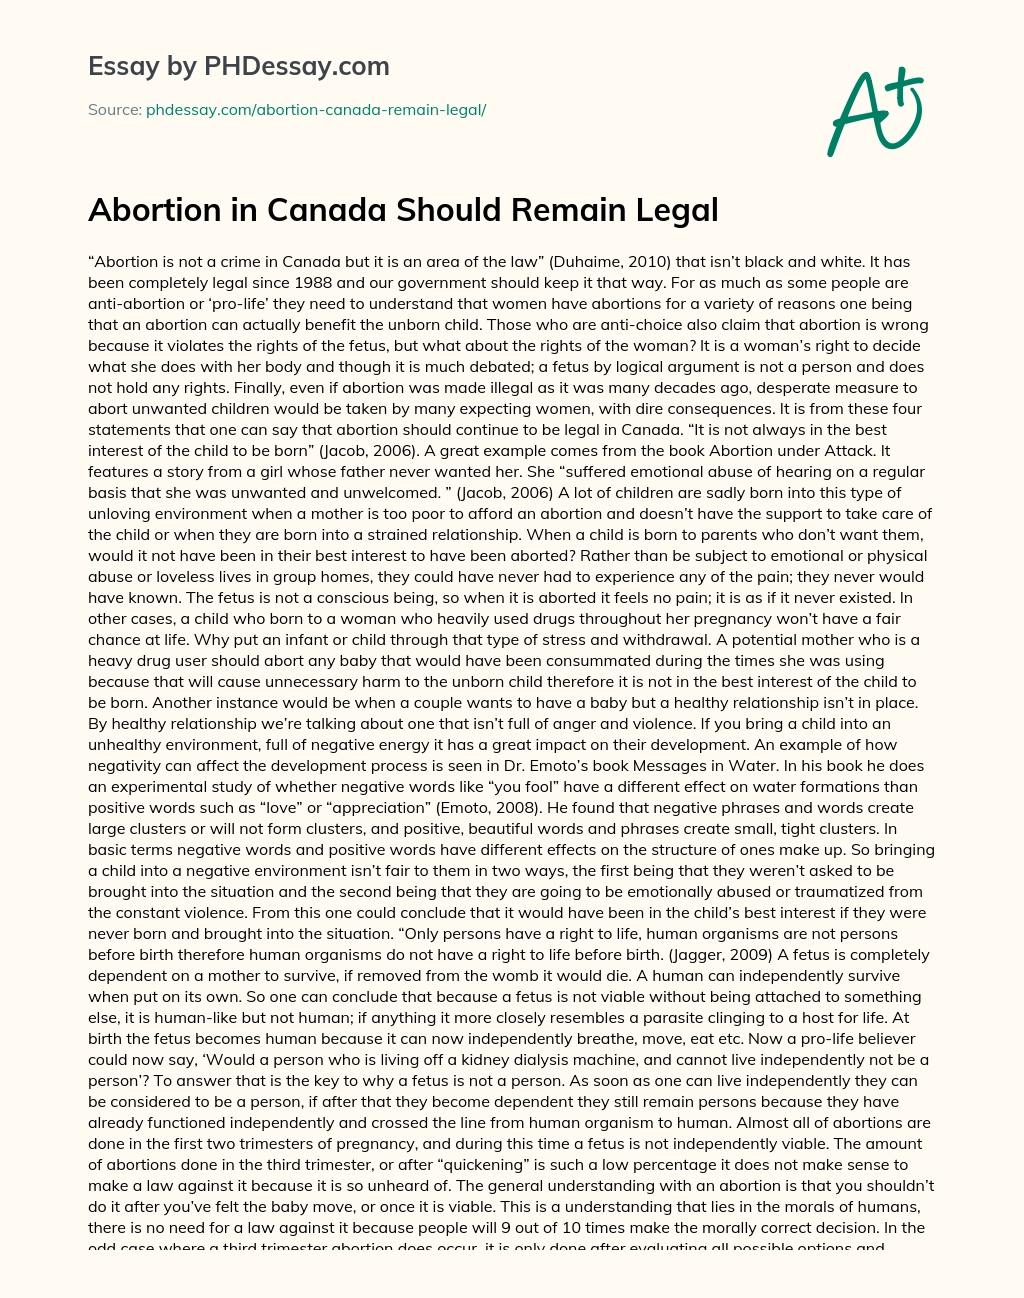 Abortion in Canada Should Remain Legal essay